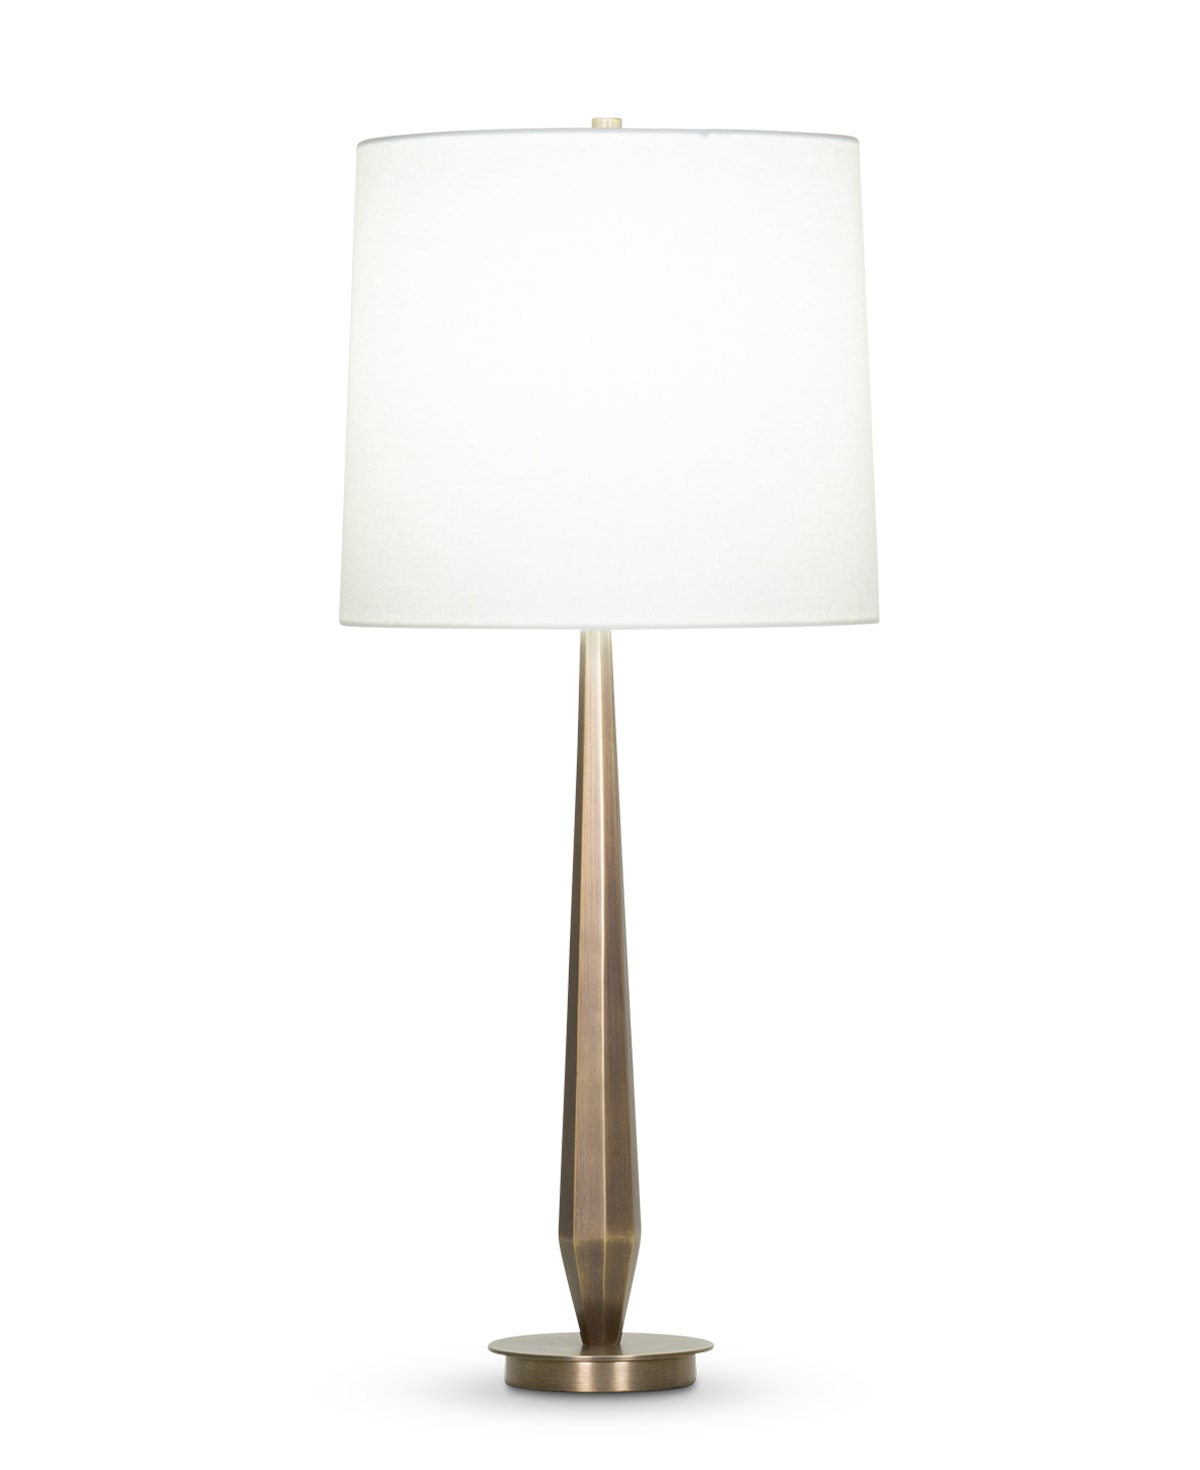 FlowDecor Baby Zoe Table Lamp in metal with antique brass finish and off-white linen tapered drum shade (# 4359)